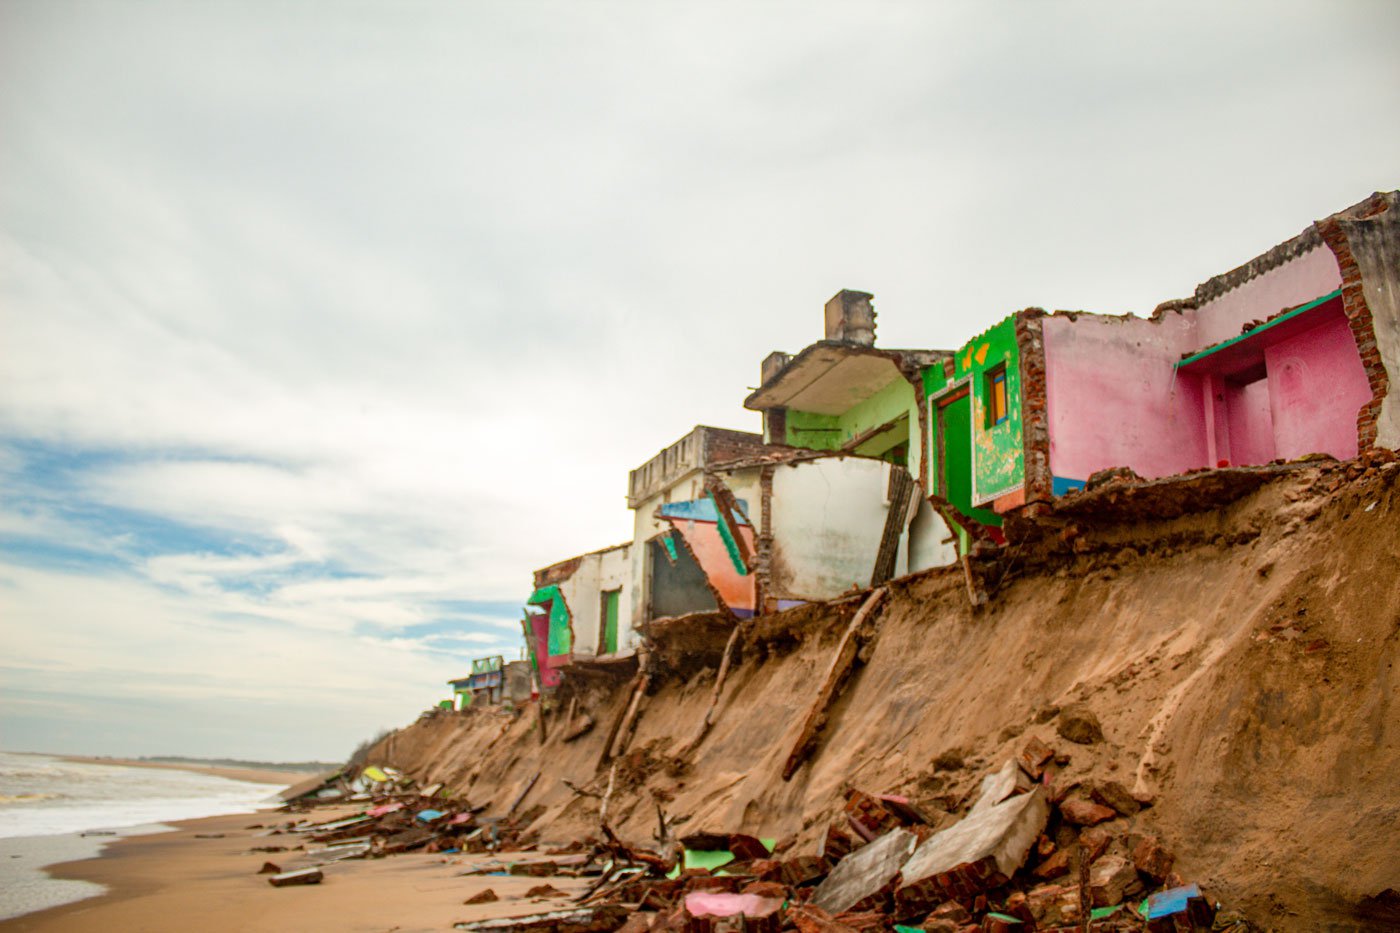 Constant erosion by the sea has damaged the houses